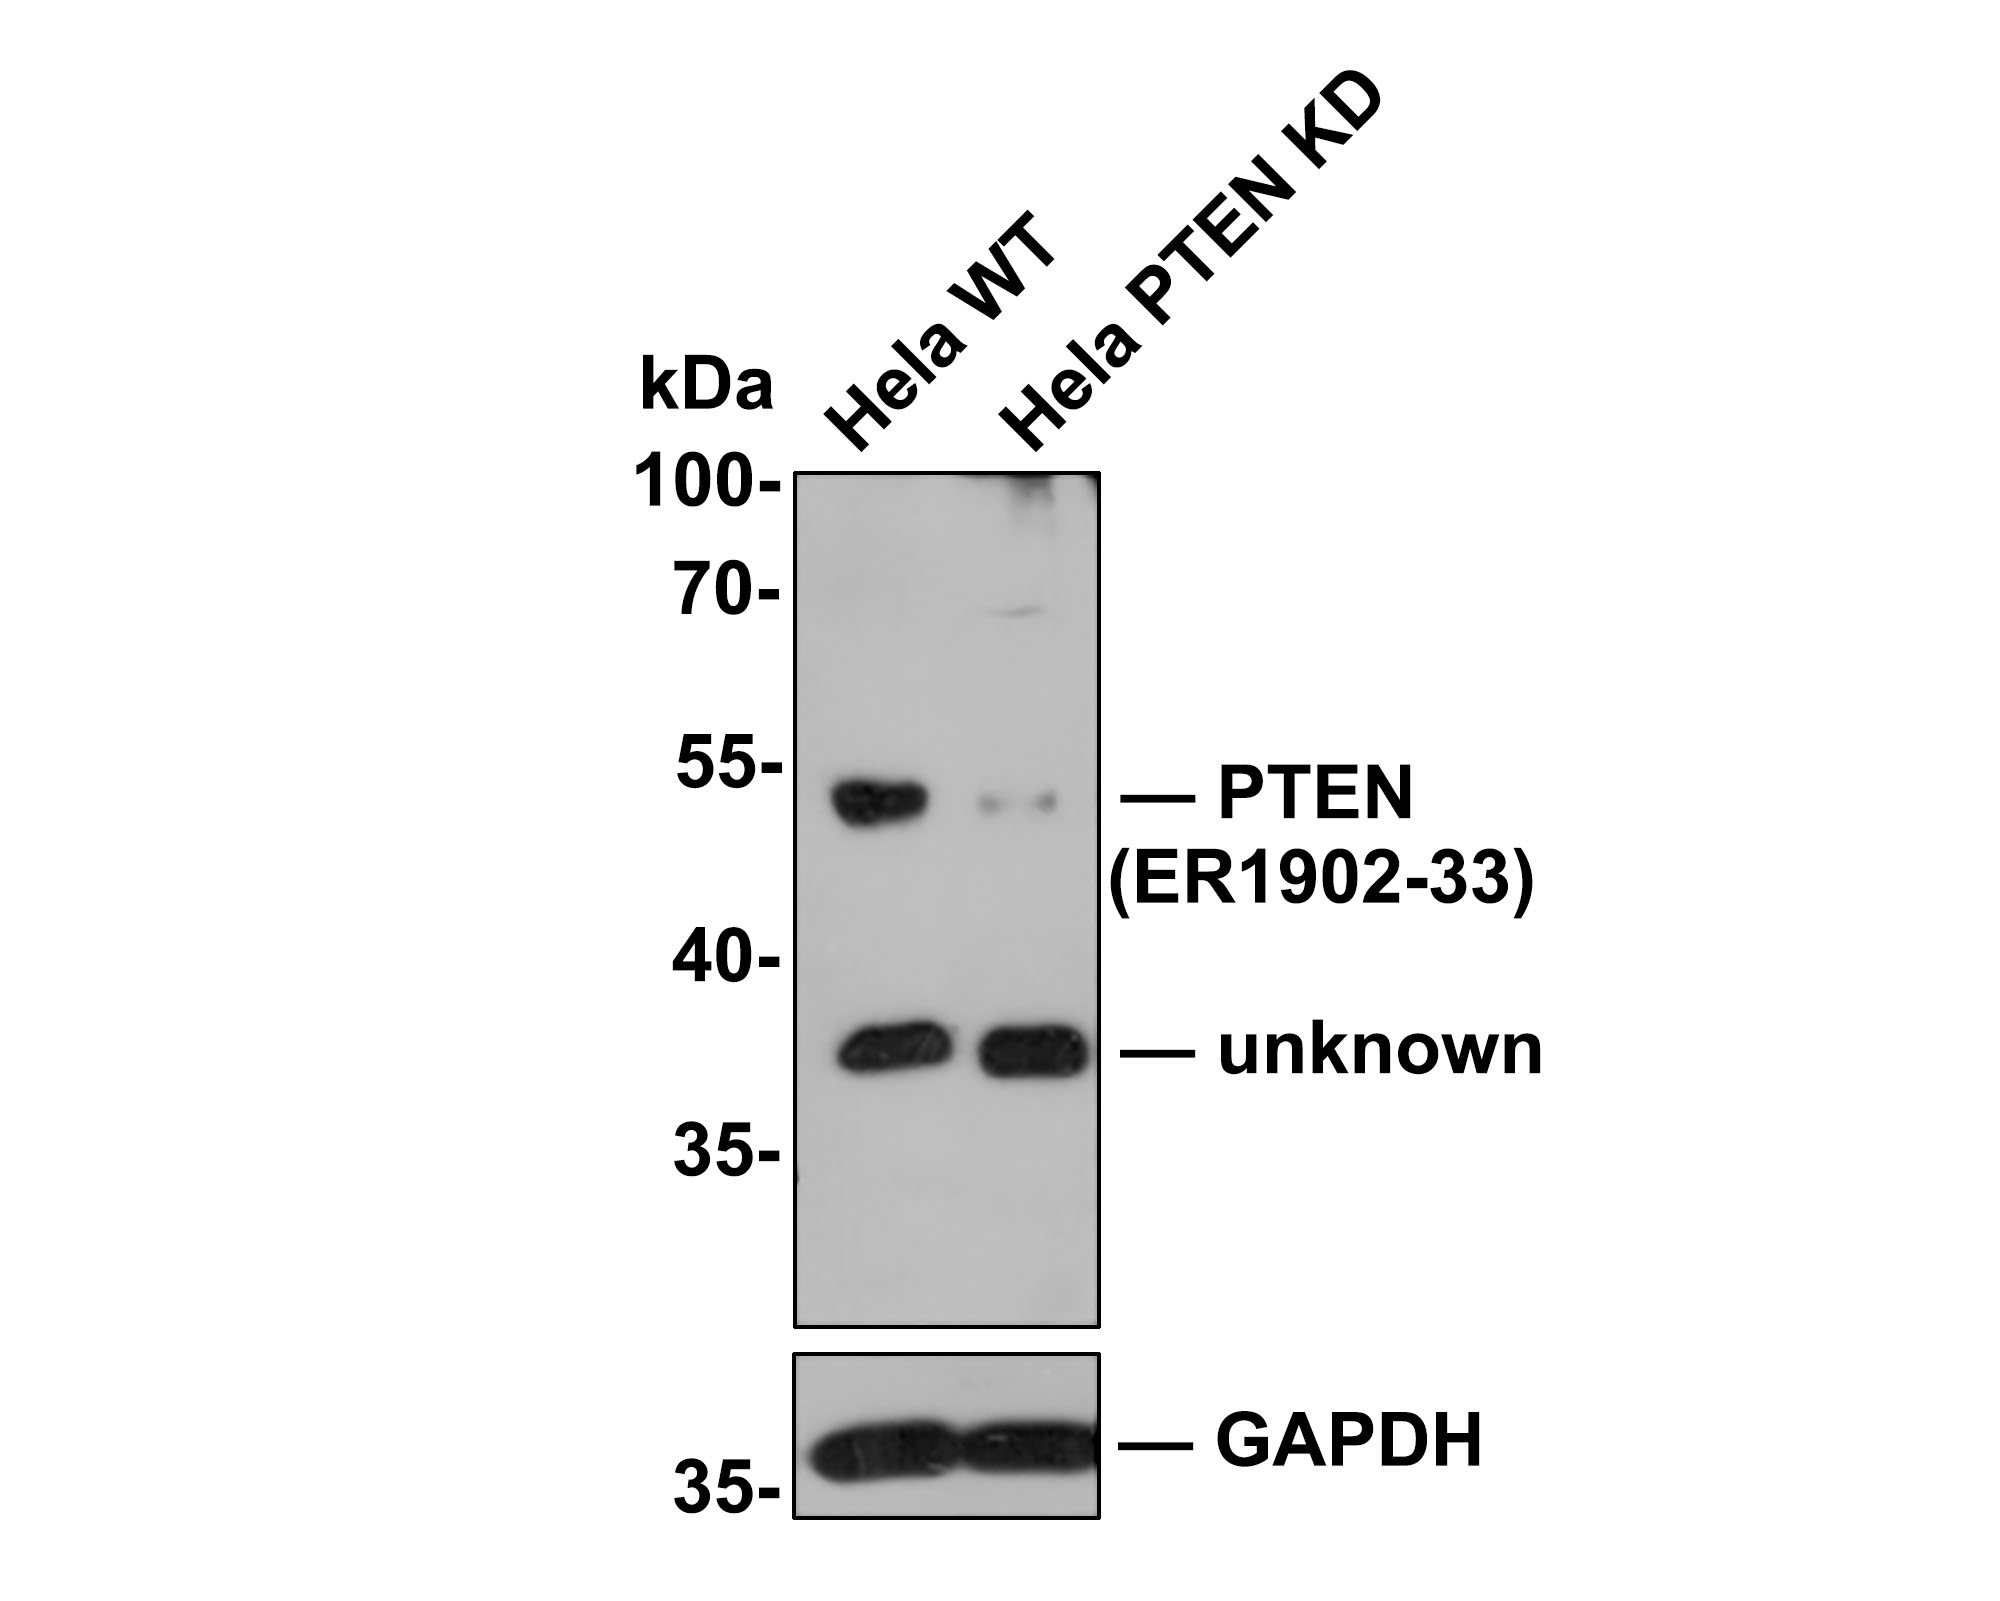 All lanes: Western blot analysis of PTEN with anti-PTEN antibody (ER1902-33) at 1/500 dilution.<br />
Lane 1: Wild-type Hela whole cell lysate (10 µg).<br />
Lane 2: PTEN knockdown Hela whole cell lysate (10 µg).<br />
<br />
ER1902-33 was shown to specifically react with PTEN in wild-type Hela cells. Weakened band was observed when PTEN knockdown sample was tested. Wild-type and PTEN knockdown samples were subjected to SDS-PAGE. Proteins were transferred to a PVDF membrane and blocked with 5% NFDM in TBST for 1 hour at room temperature. The primary antibody (ER1902-33, 1/500) was used in 5% BSA at room temperature for 2 hours. Goat Anti-Rabbit IgG-HRP Secondary Antibody (HA1001) at 1:300,000 dilution was used for 1 hour at room temperature.